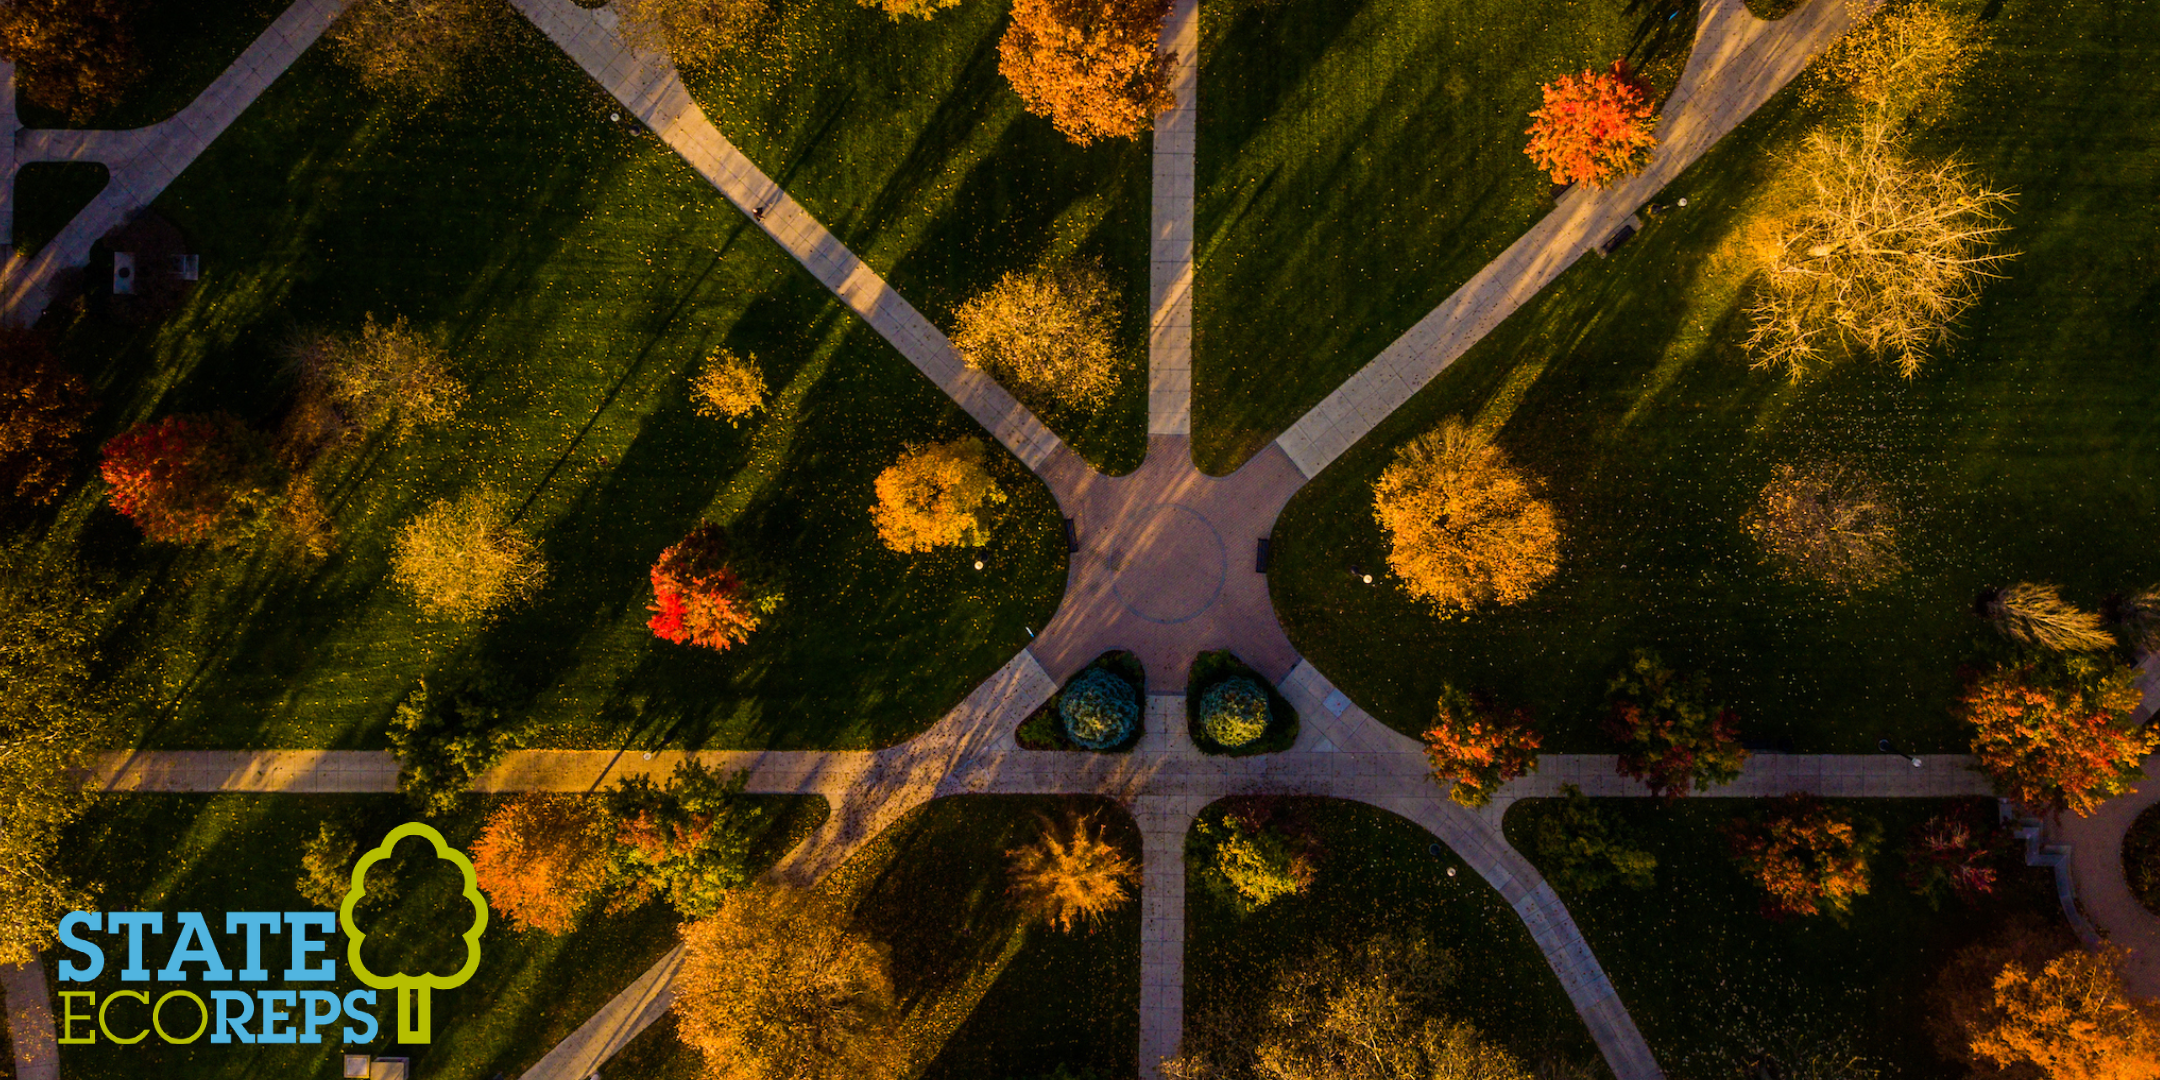 An overview image of the quad during fall with the Eco Reps wordmark in the lower left corner